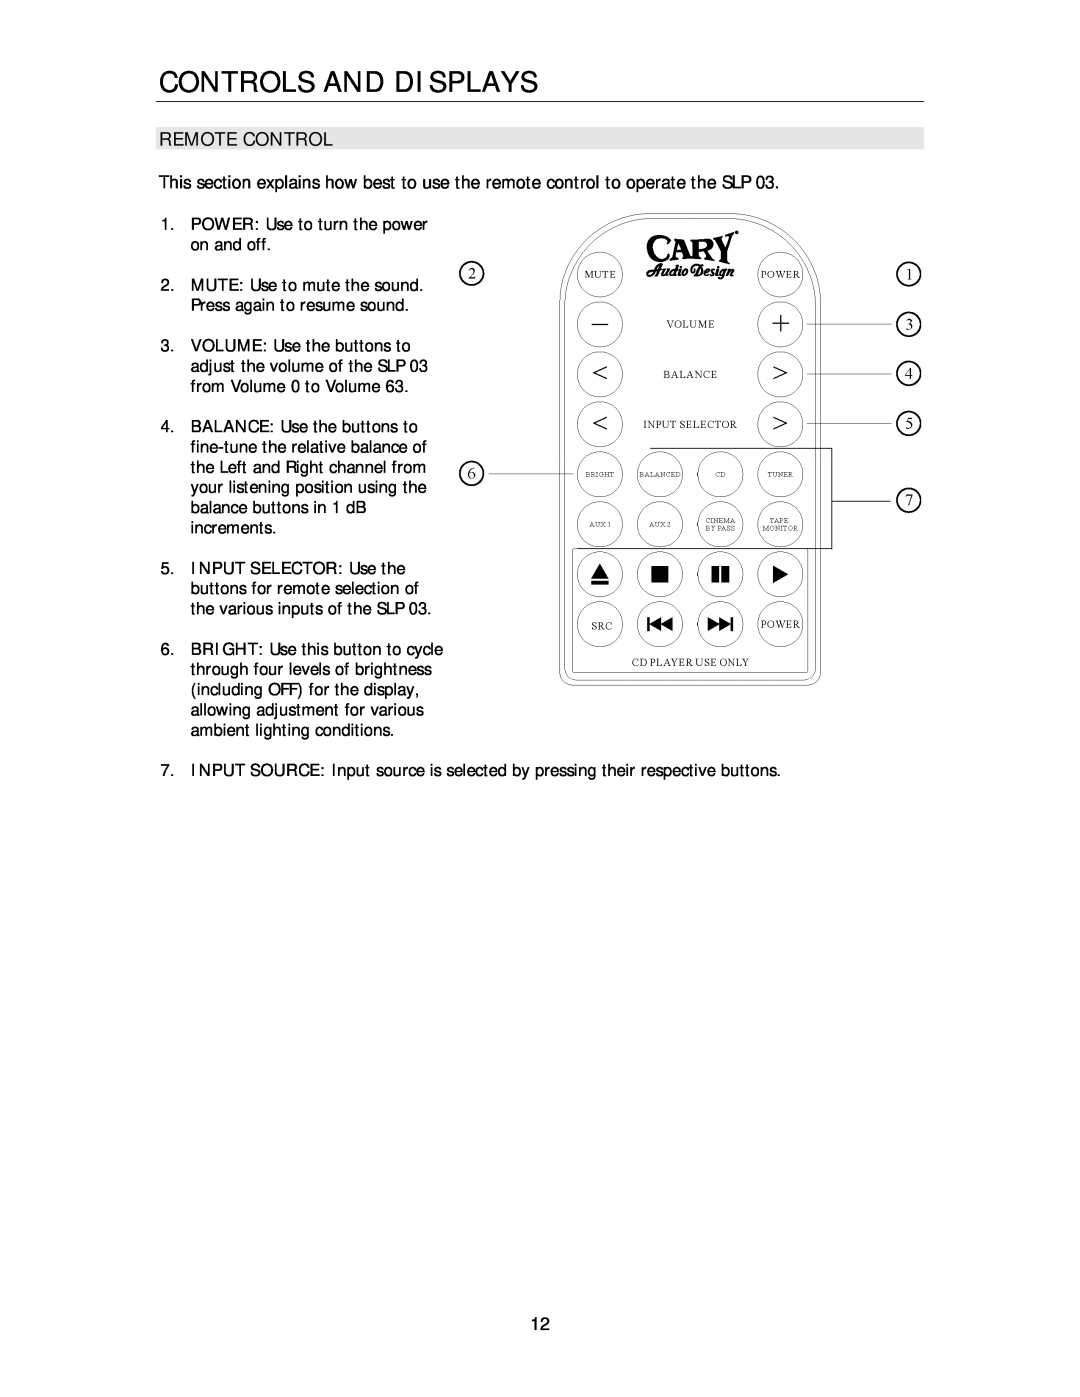 Cary Audio Design SLP 03 owner manual Remote Control, Controls And Displays 